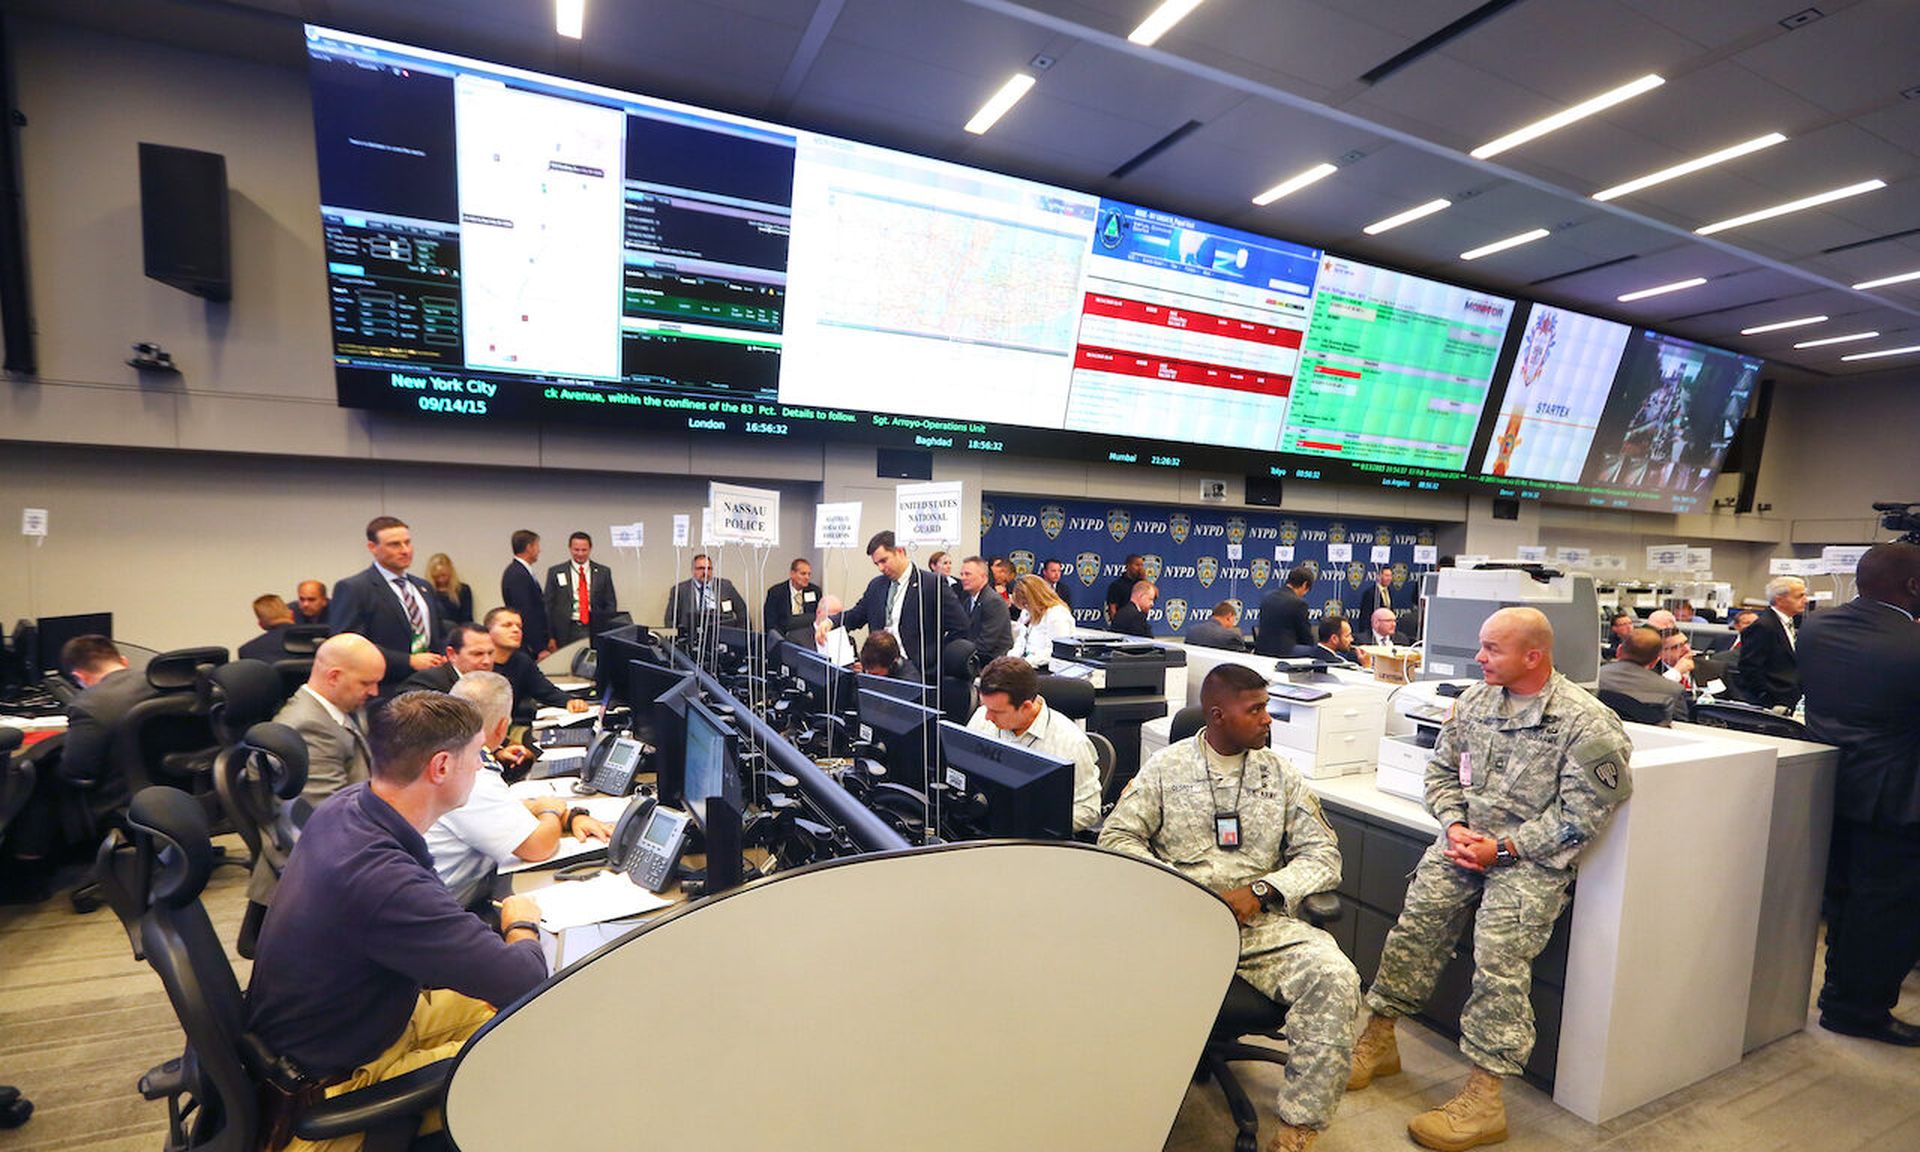 A shot of the Joint Operations Center at New York City Police Headquarters in New York City. Today’s columnist, Ian Pratt of HP, says that security operations centers have been under stress with thousands of alerts during the work from home era. He says better endpoint security tools and zero-trust principles can make security teams stronger. (Phot...